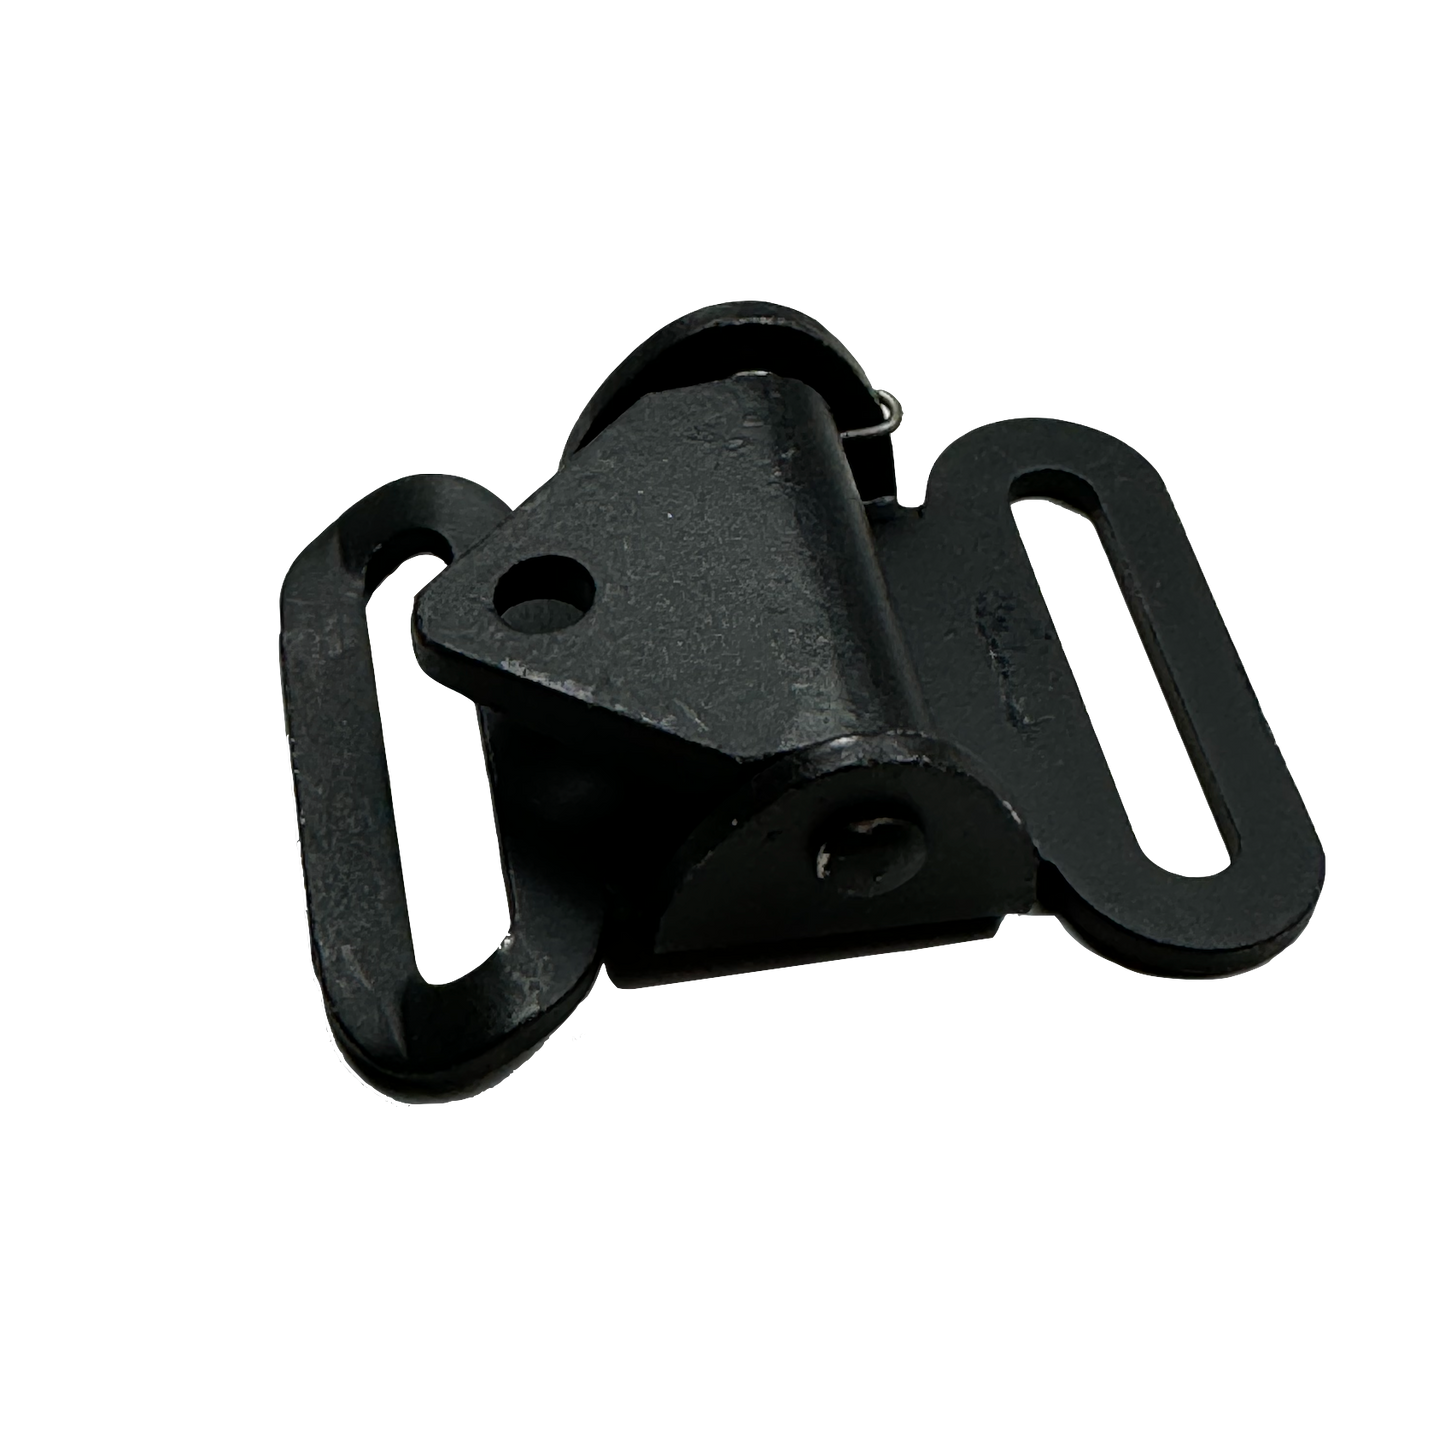 Metal Quick Release Buckle, 1" for Sling Applications, Berry Compliant - Black (Sold per Each)